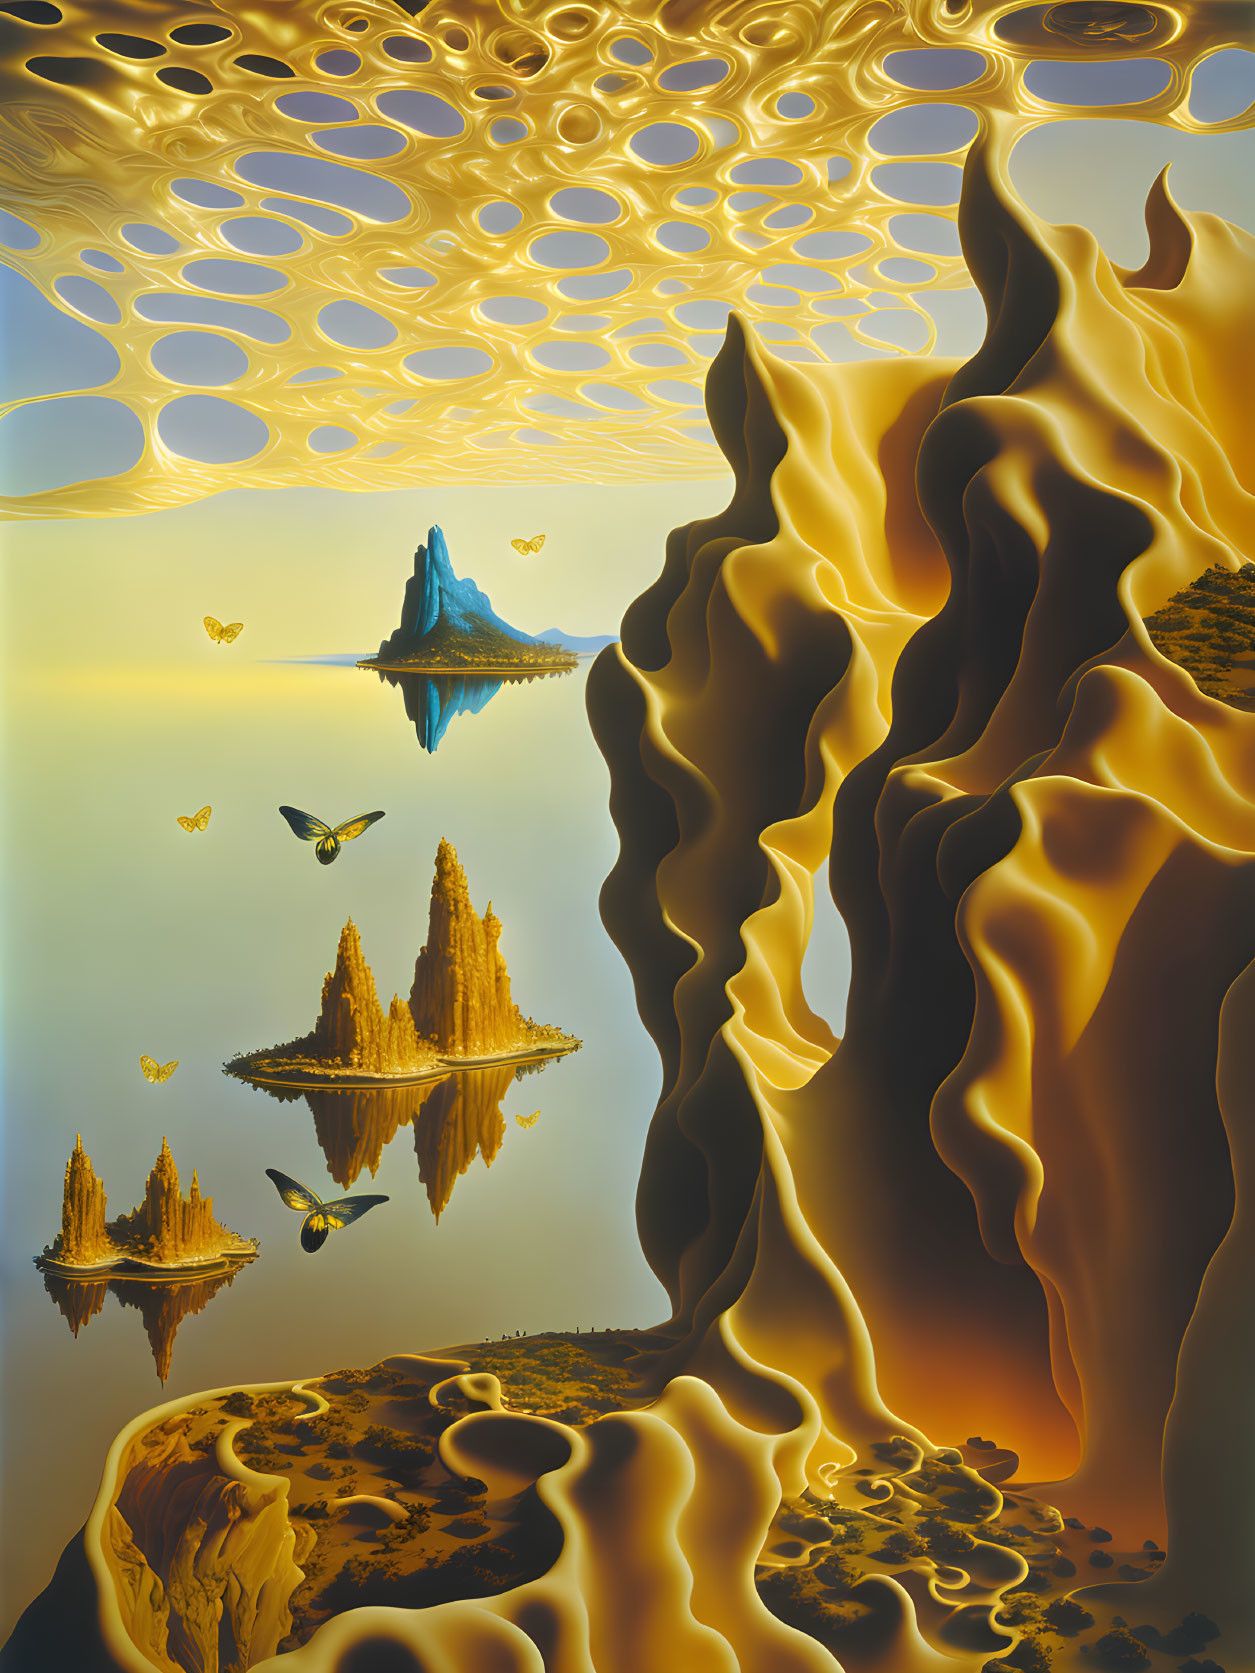 Dali and the Edge of Forever